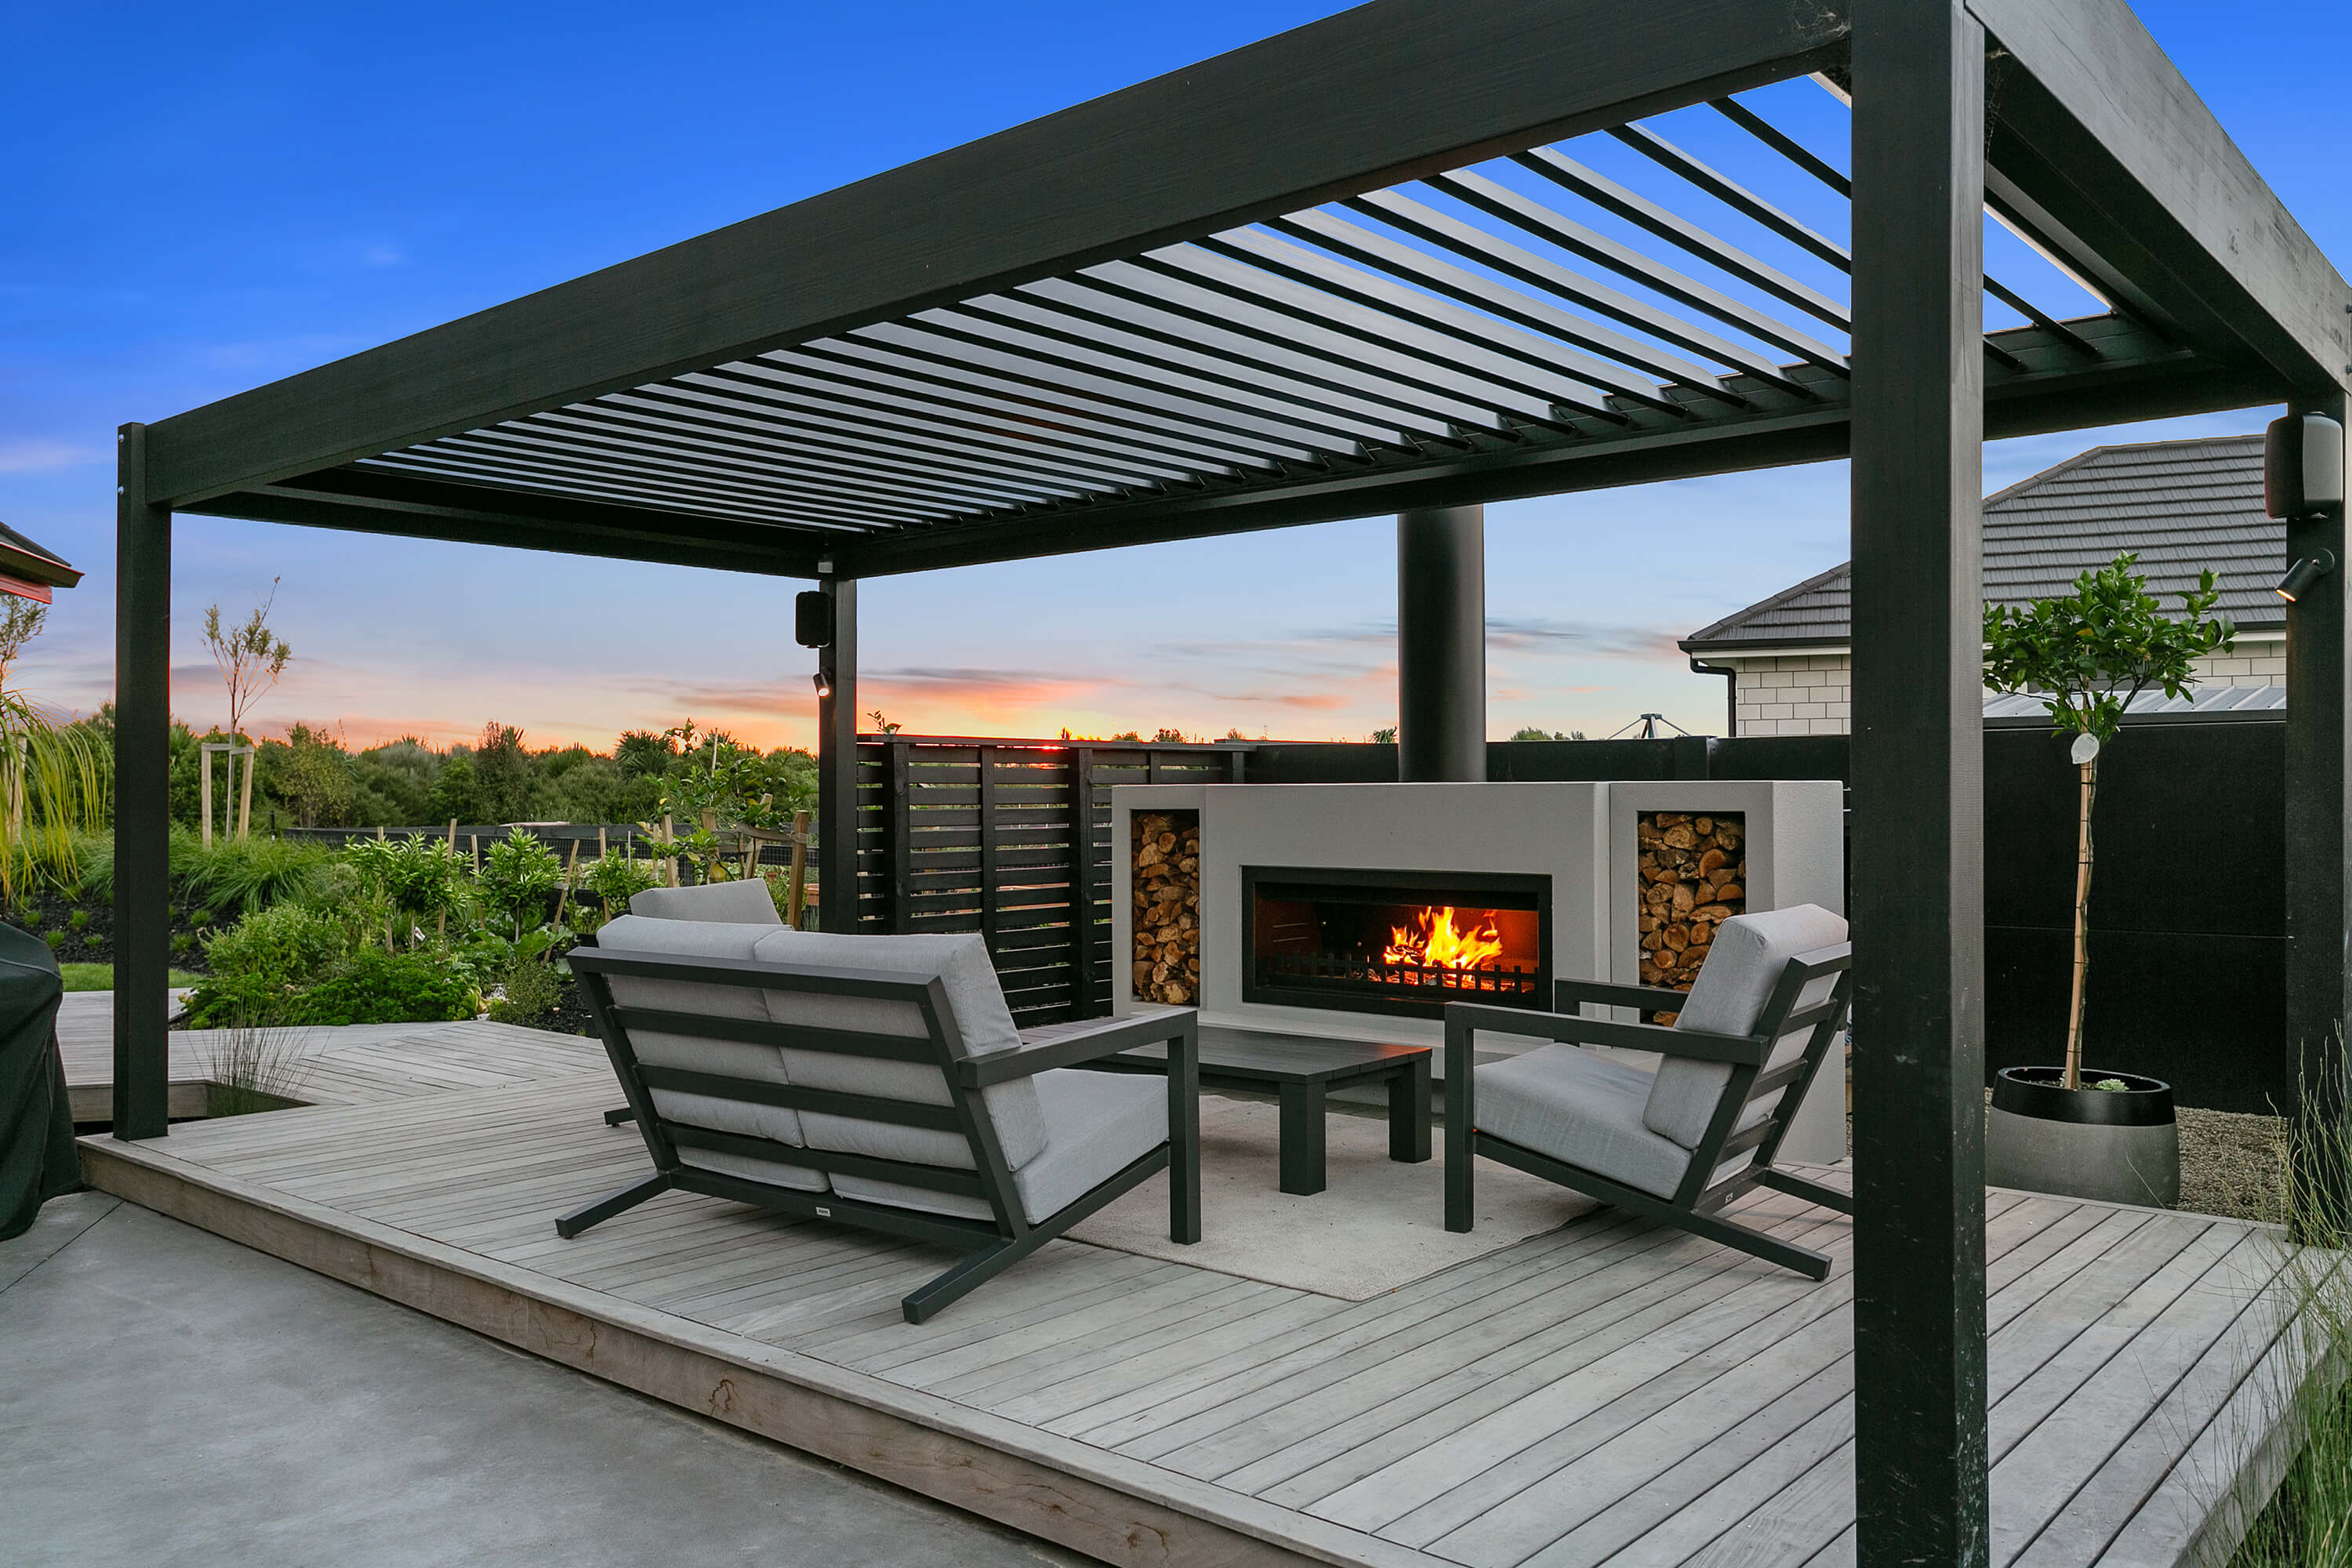 What is an outdoor fireplace?